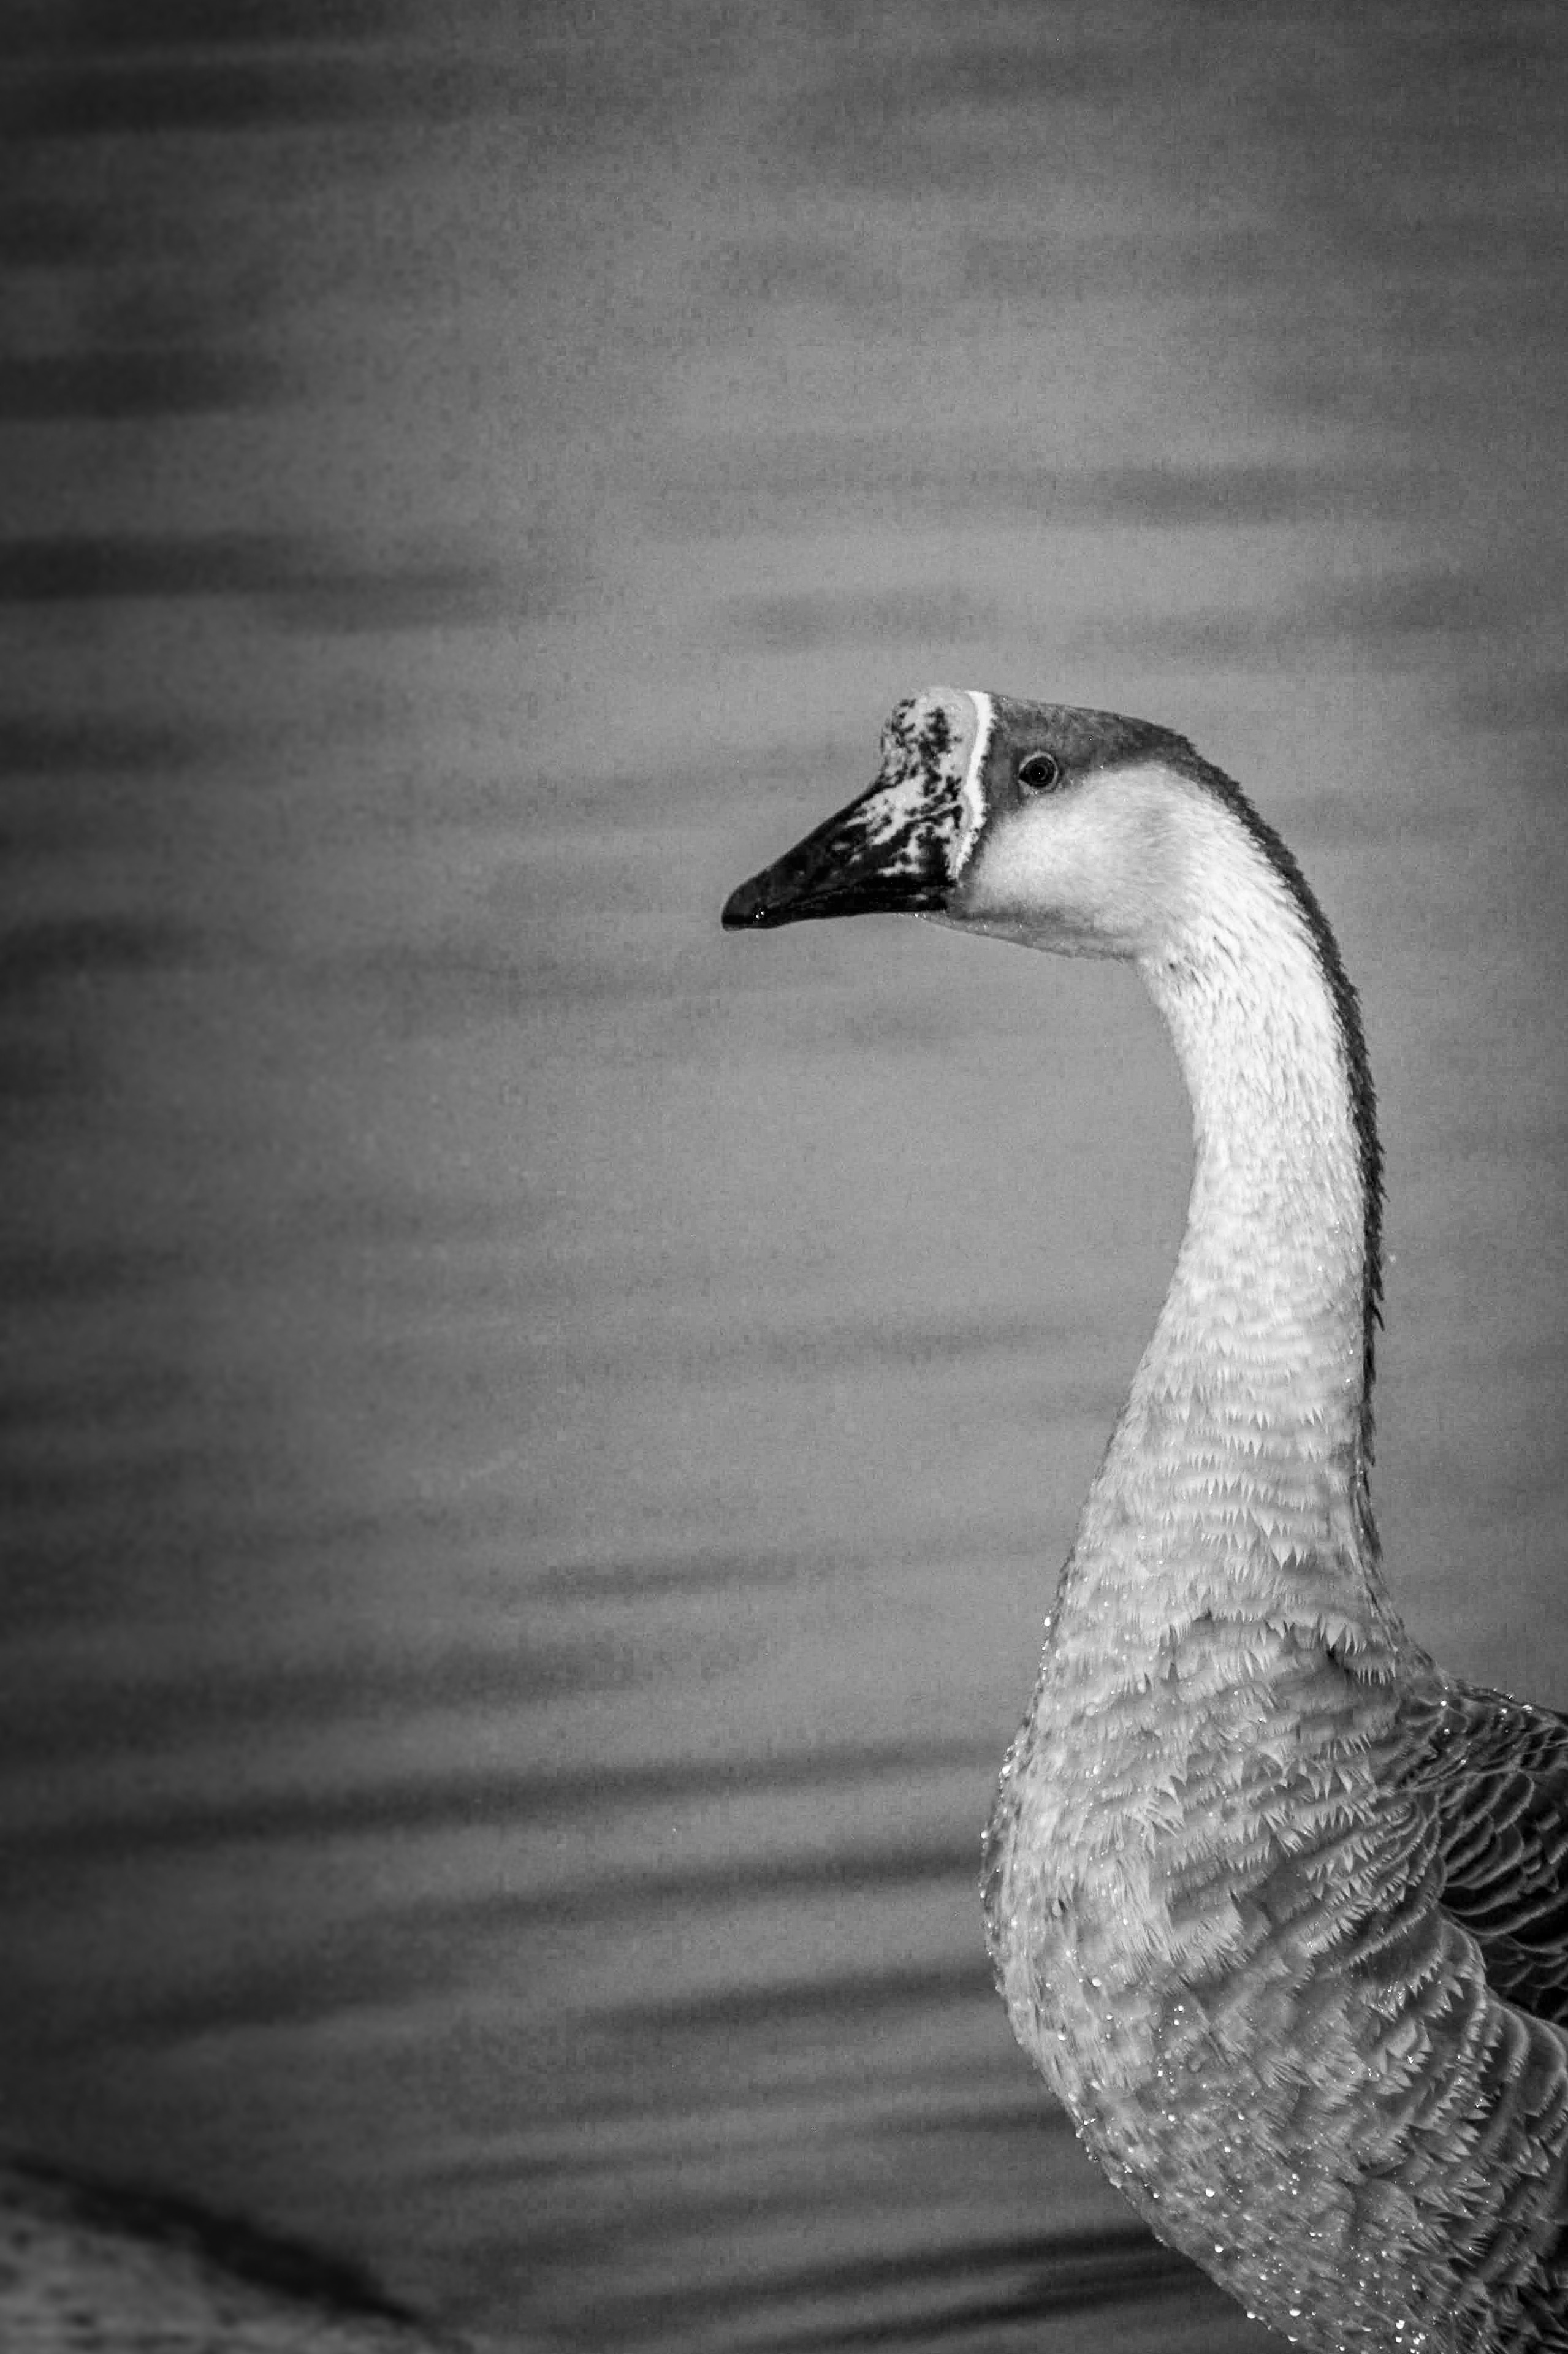 This Goose was not happy with his photoshoot. This Goose came out of the water to pay me a visit.
